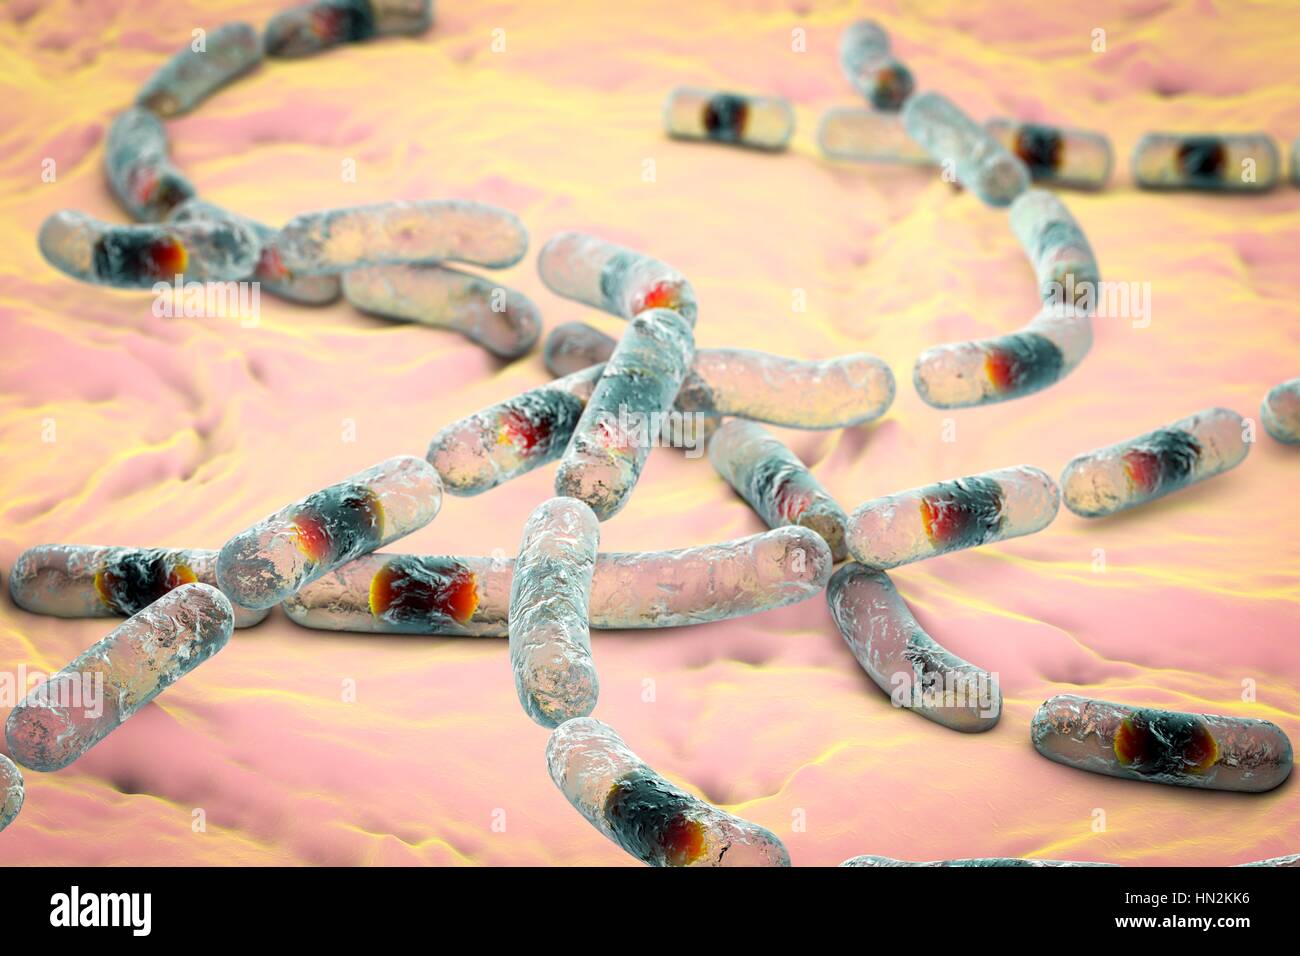 Bacillus cereus bacteria, computer illustration. These are Gram-positive rod-shaped spore-producing bacteria, that are often arranged in chains (streptobacilli). Some strains can cause food poisoning. Stock Photo